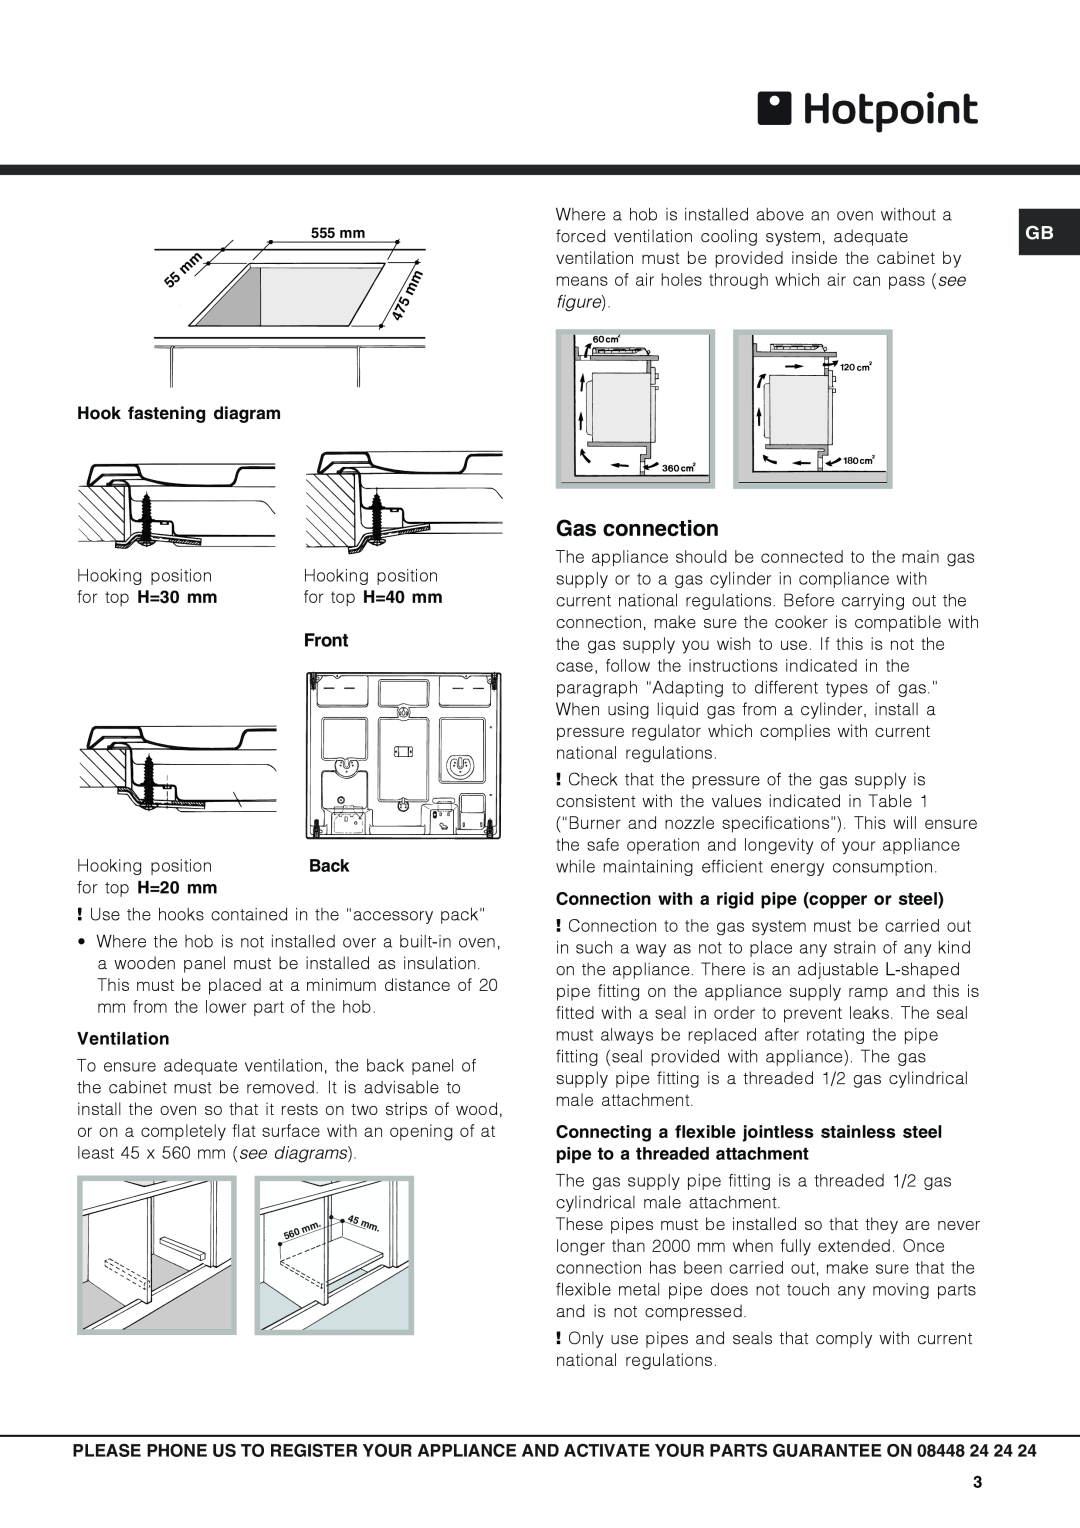 Hotpoint GF640W Gas connection, Hook fastening diagram, Front, Ventilation, Connection with a rigid pipe copper or steel 